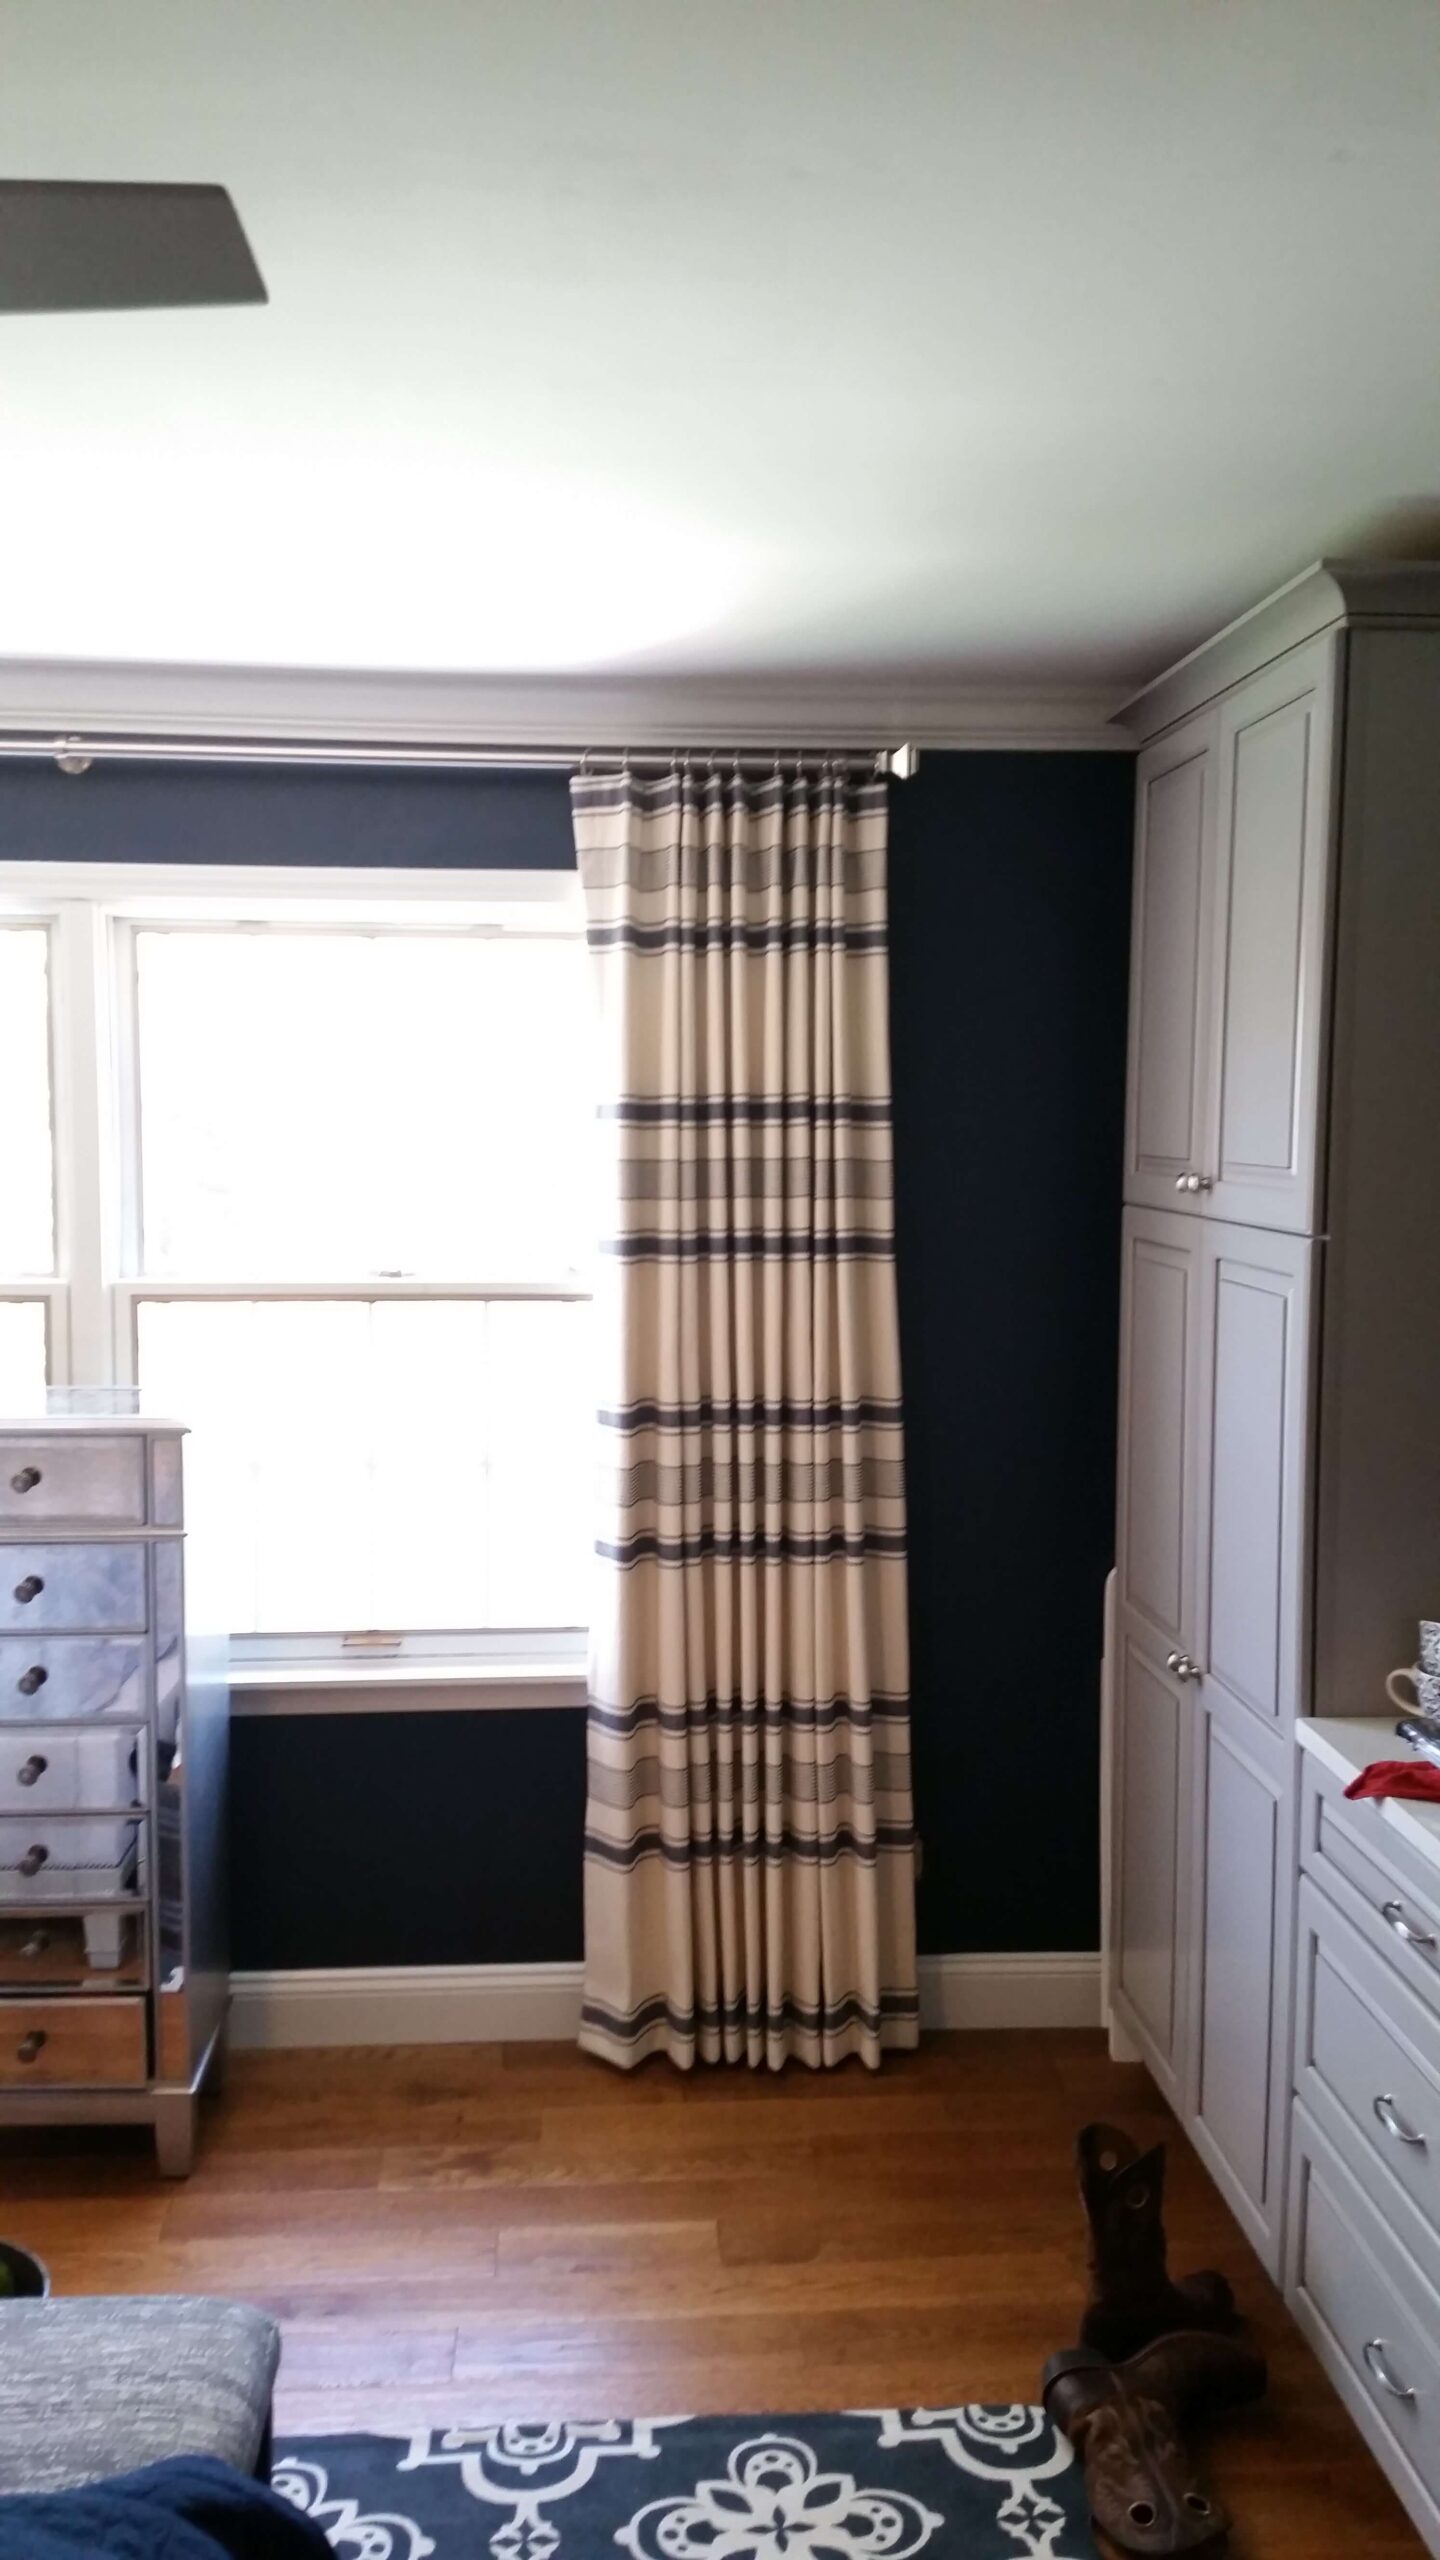 Decorating with Patterned Drapes - Drapery Street